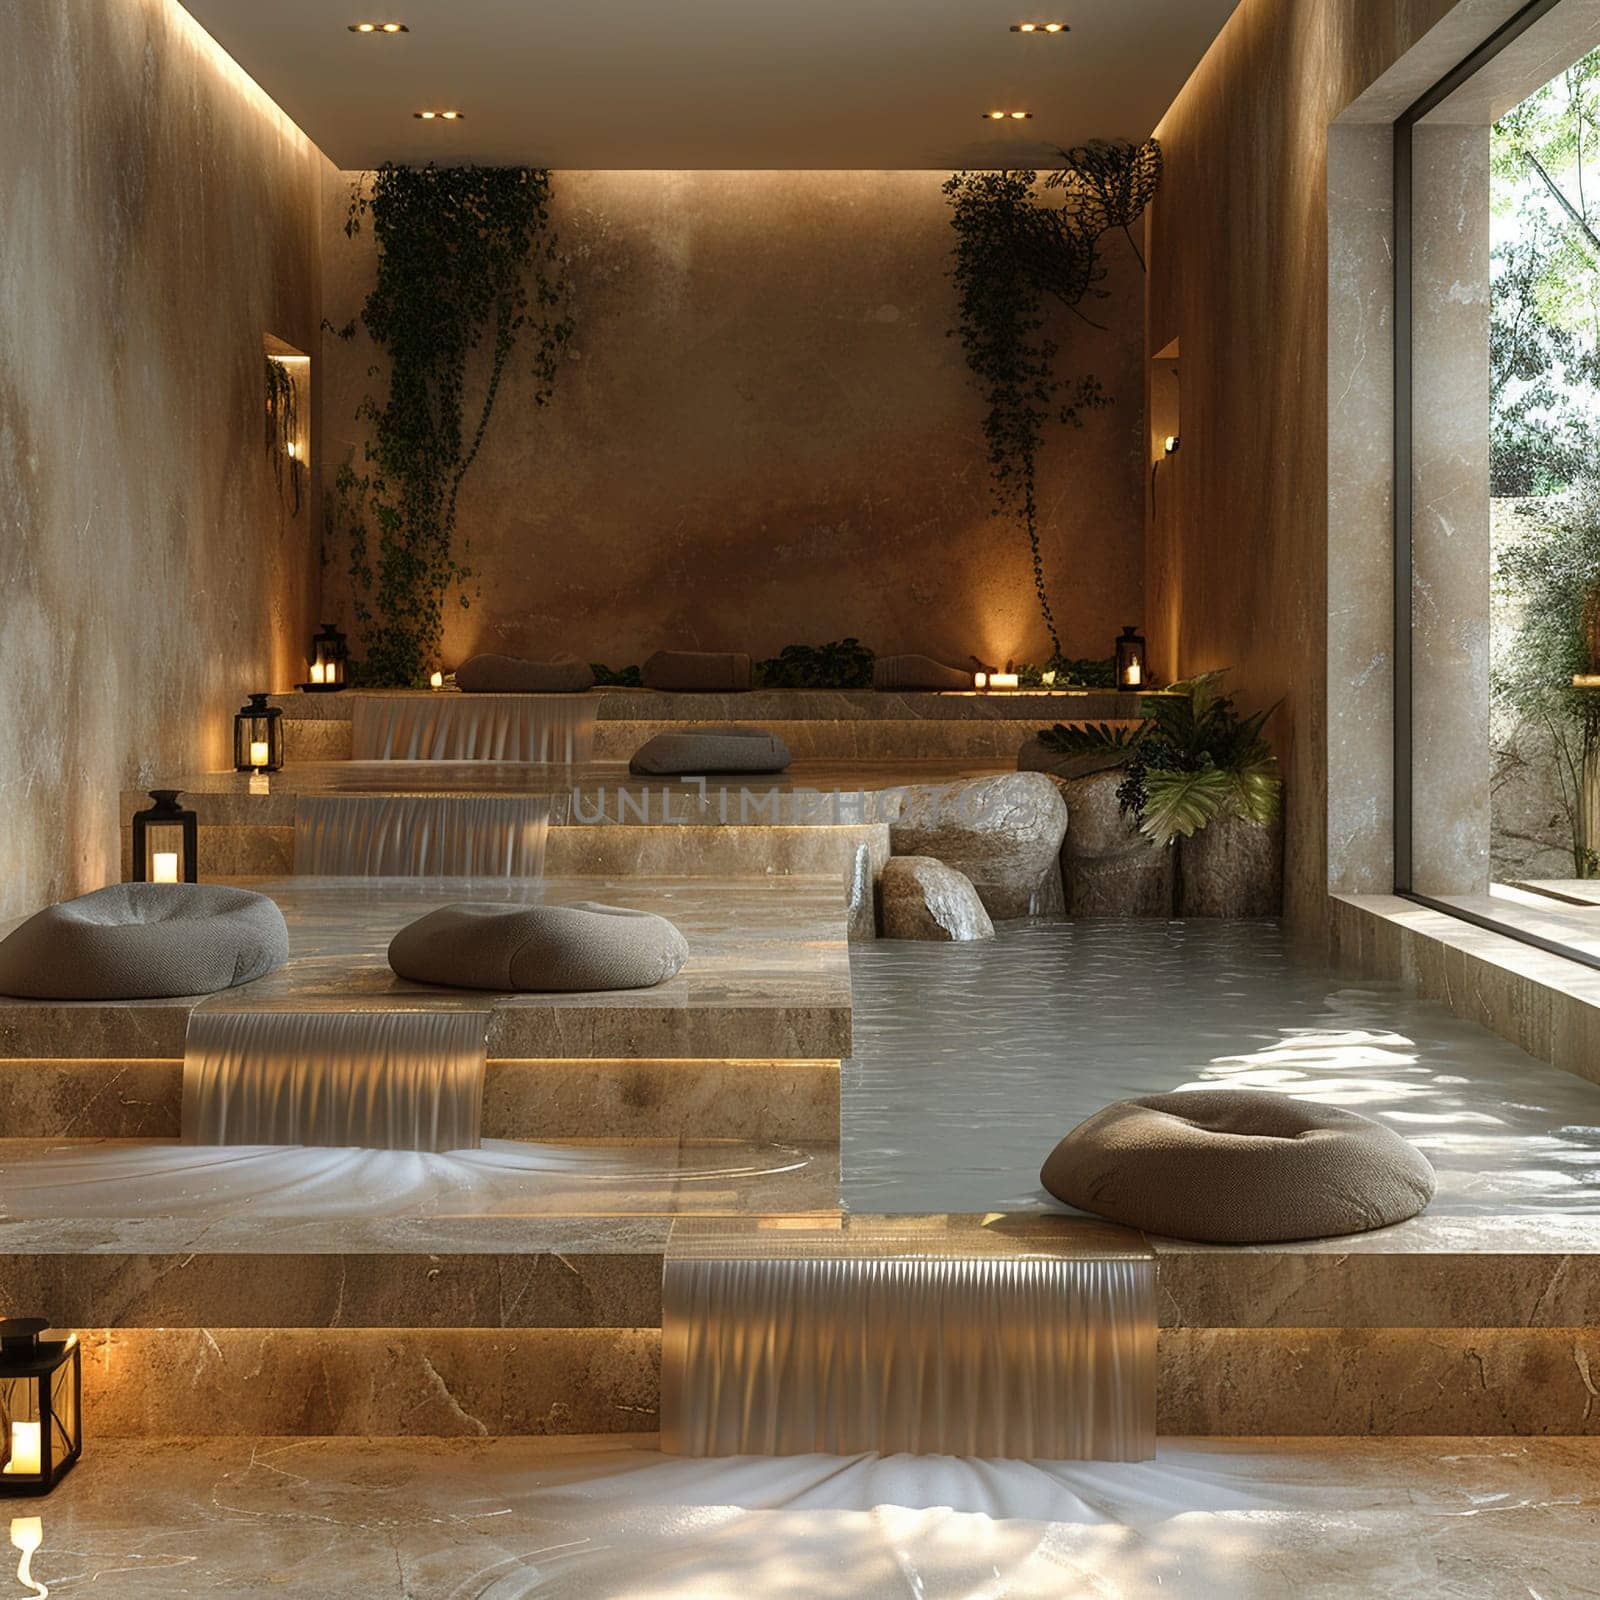 Luxurious spa reception with water features and tranquil music8K